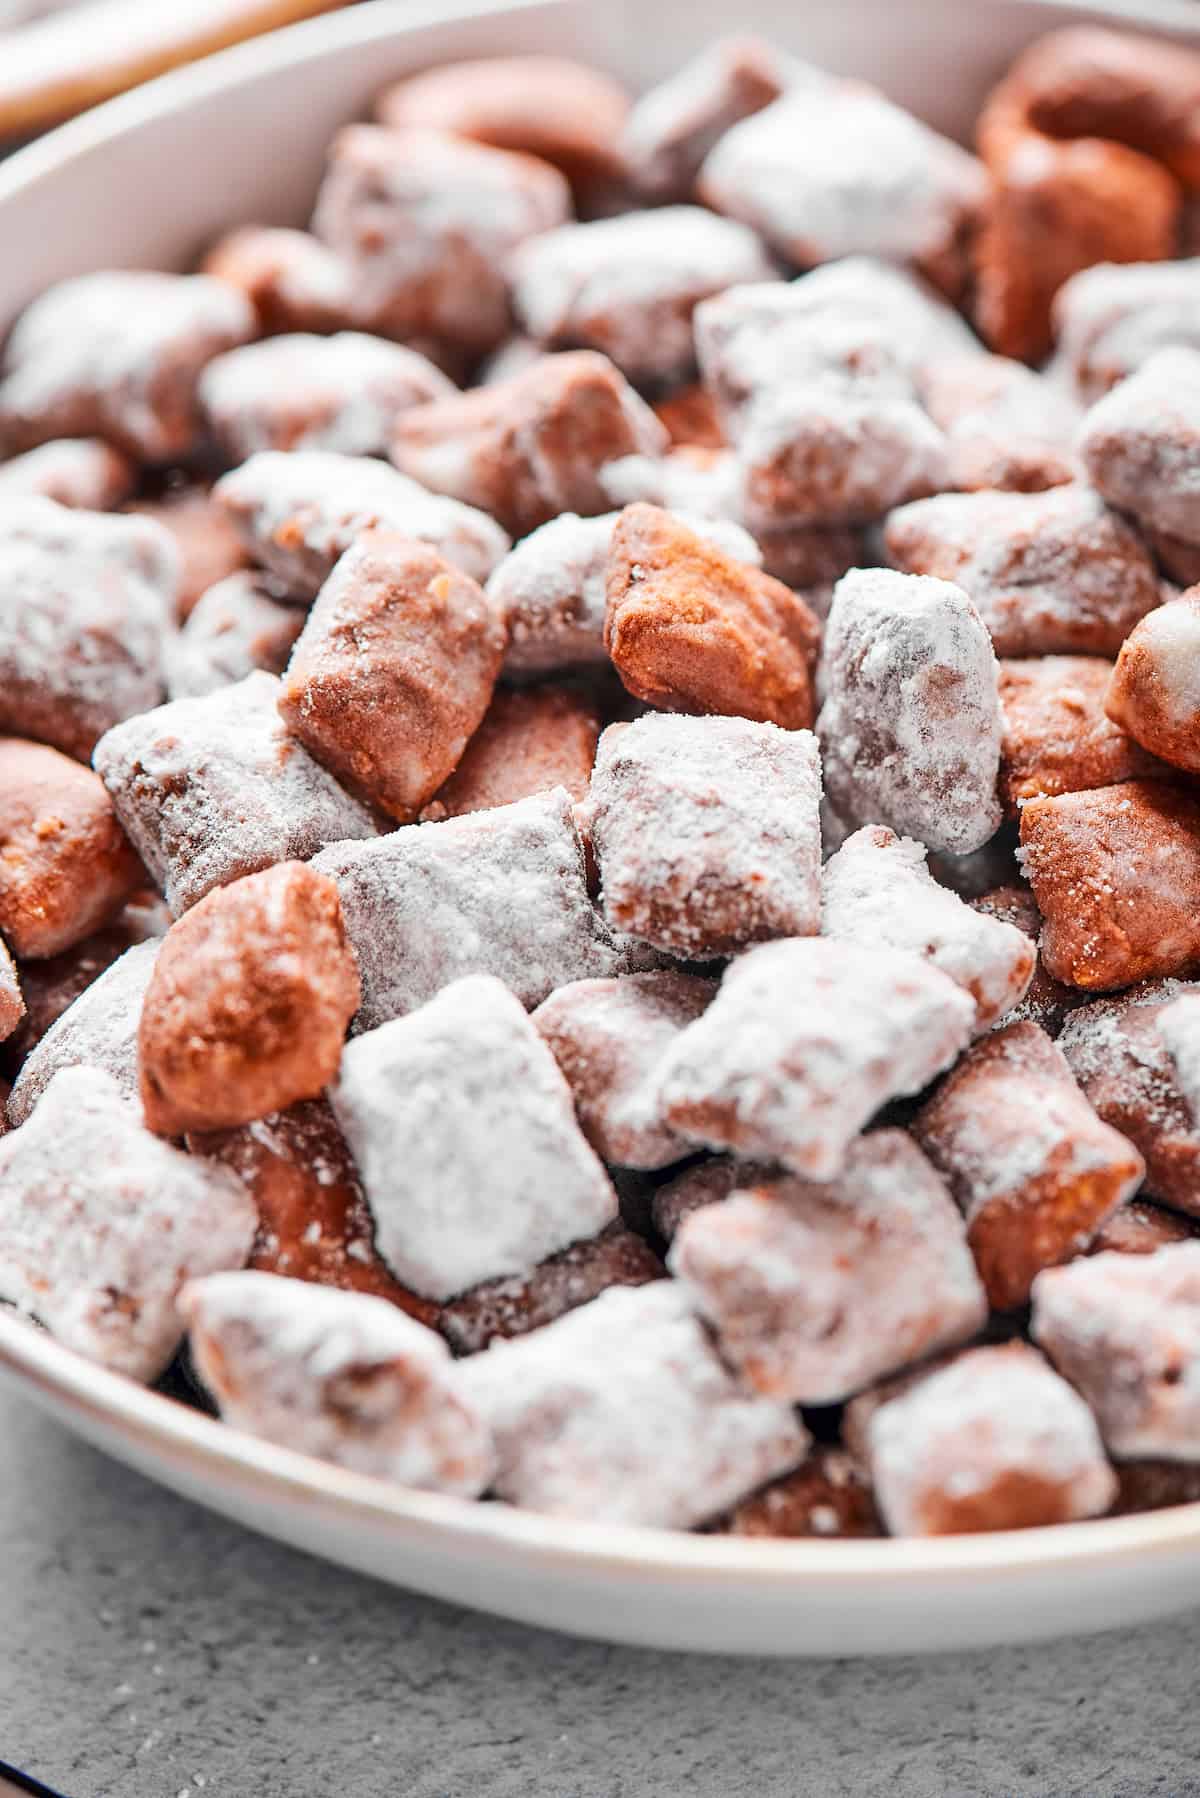 Close-up shot of puppy chow in a white bowl, to show the texture. Some pieces are fully coated in powdered sugar, while others are not.